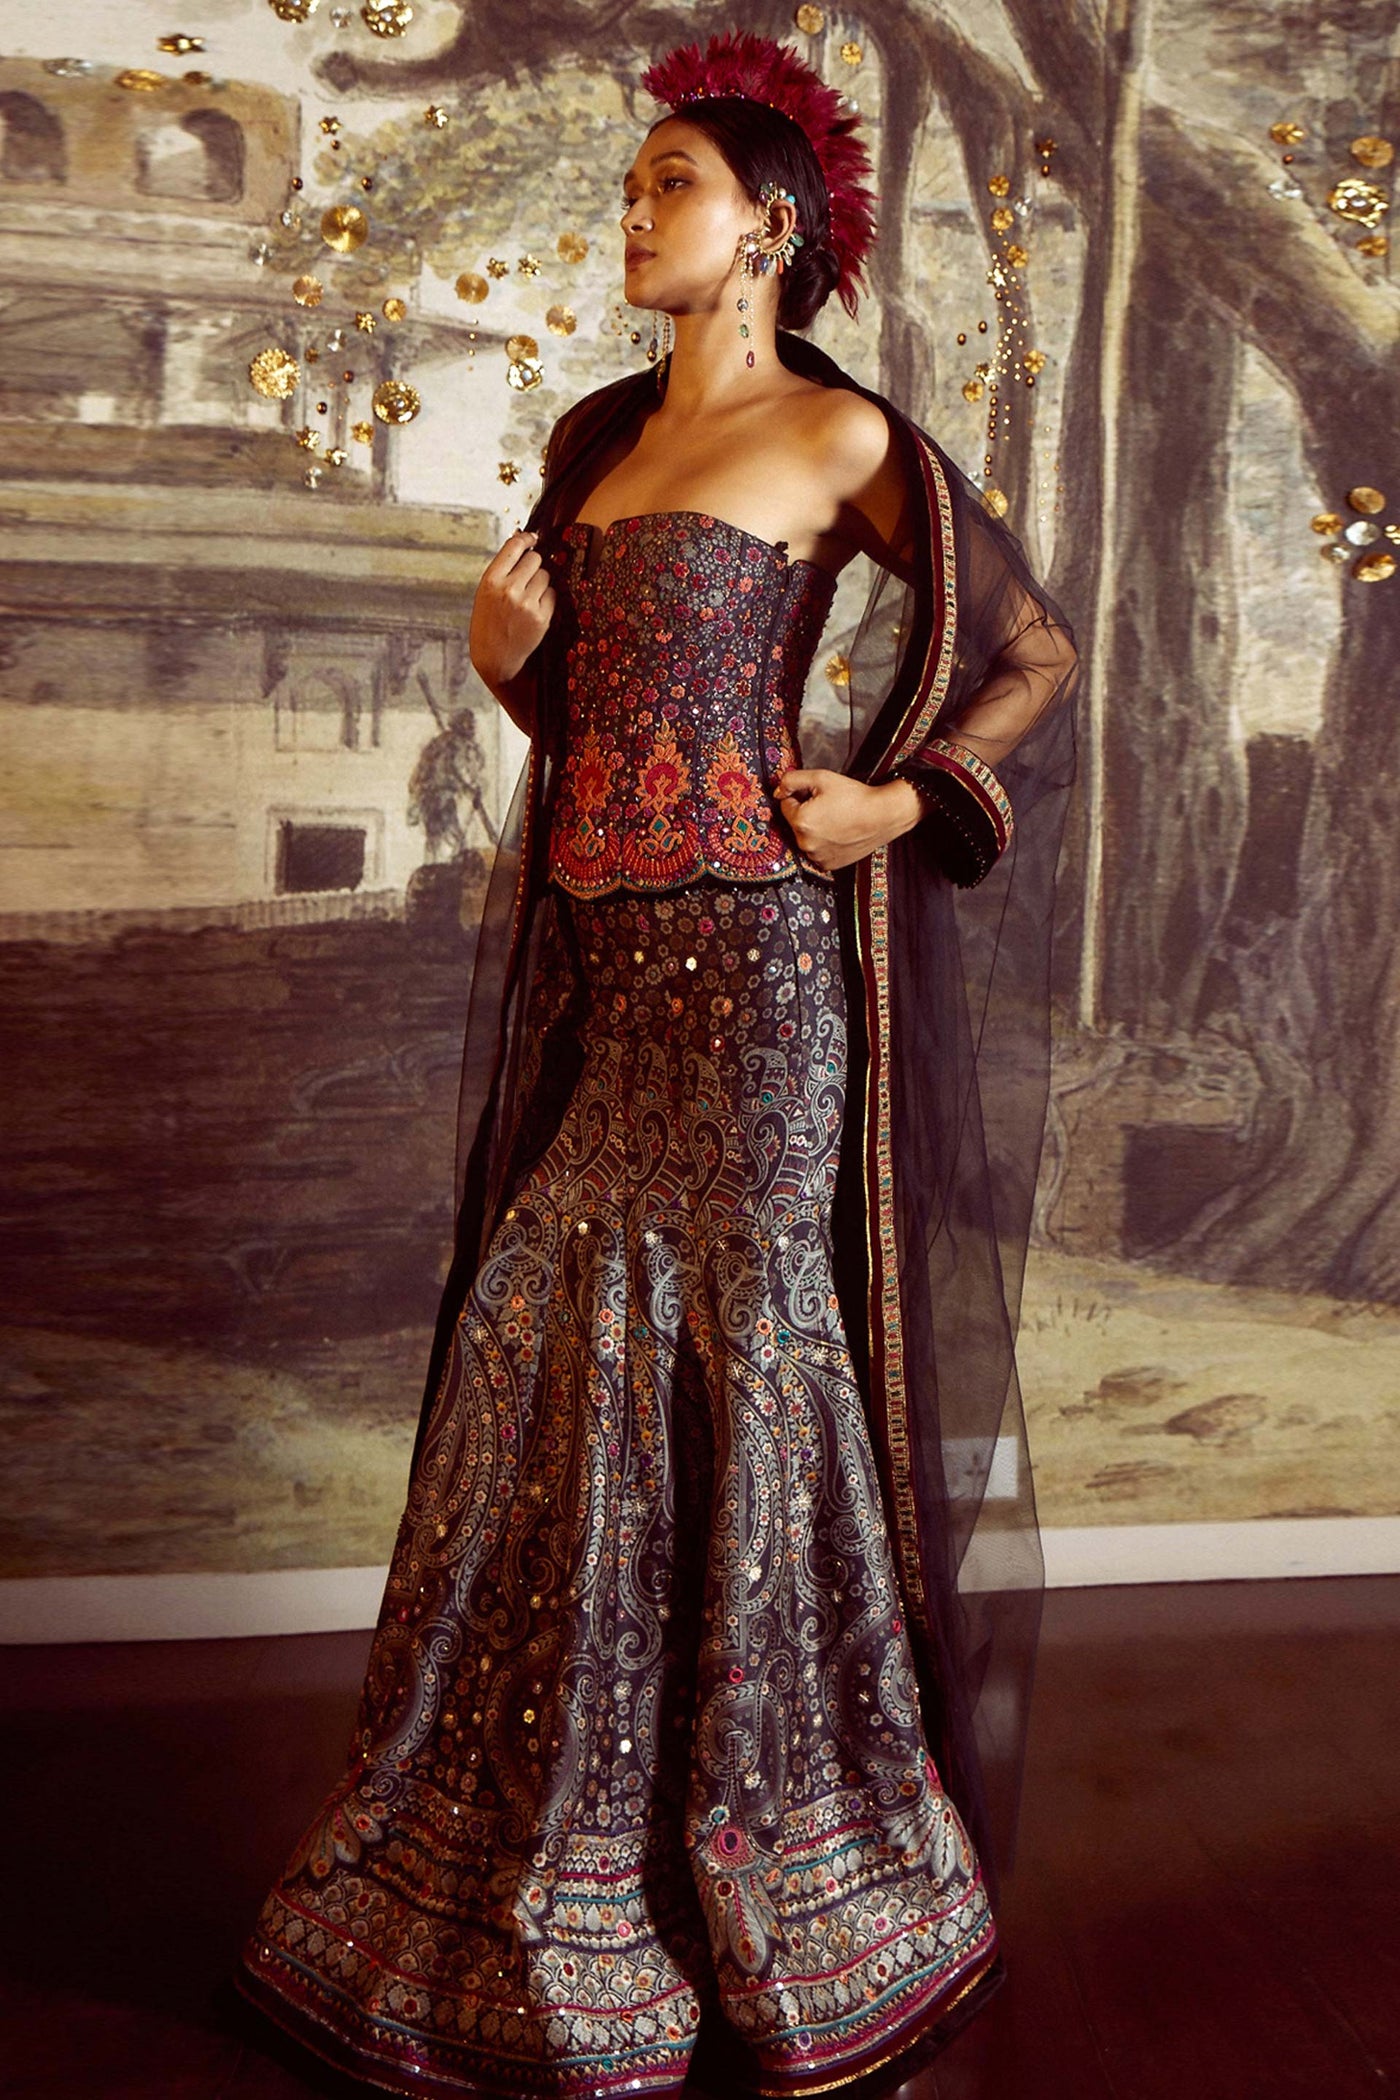 Tarun Tahiliani Panelled Printed Skirt With Aari Embroidery, Paired With Sheer Cape And Zardozi-Embroidered Corset Embellished With Fringes multicolor festive indian designer wear online shopping melange singapore